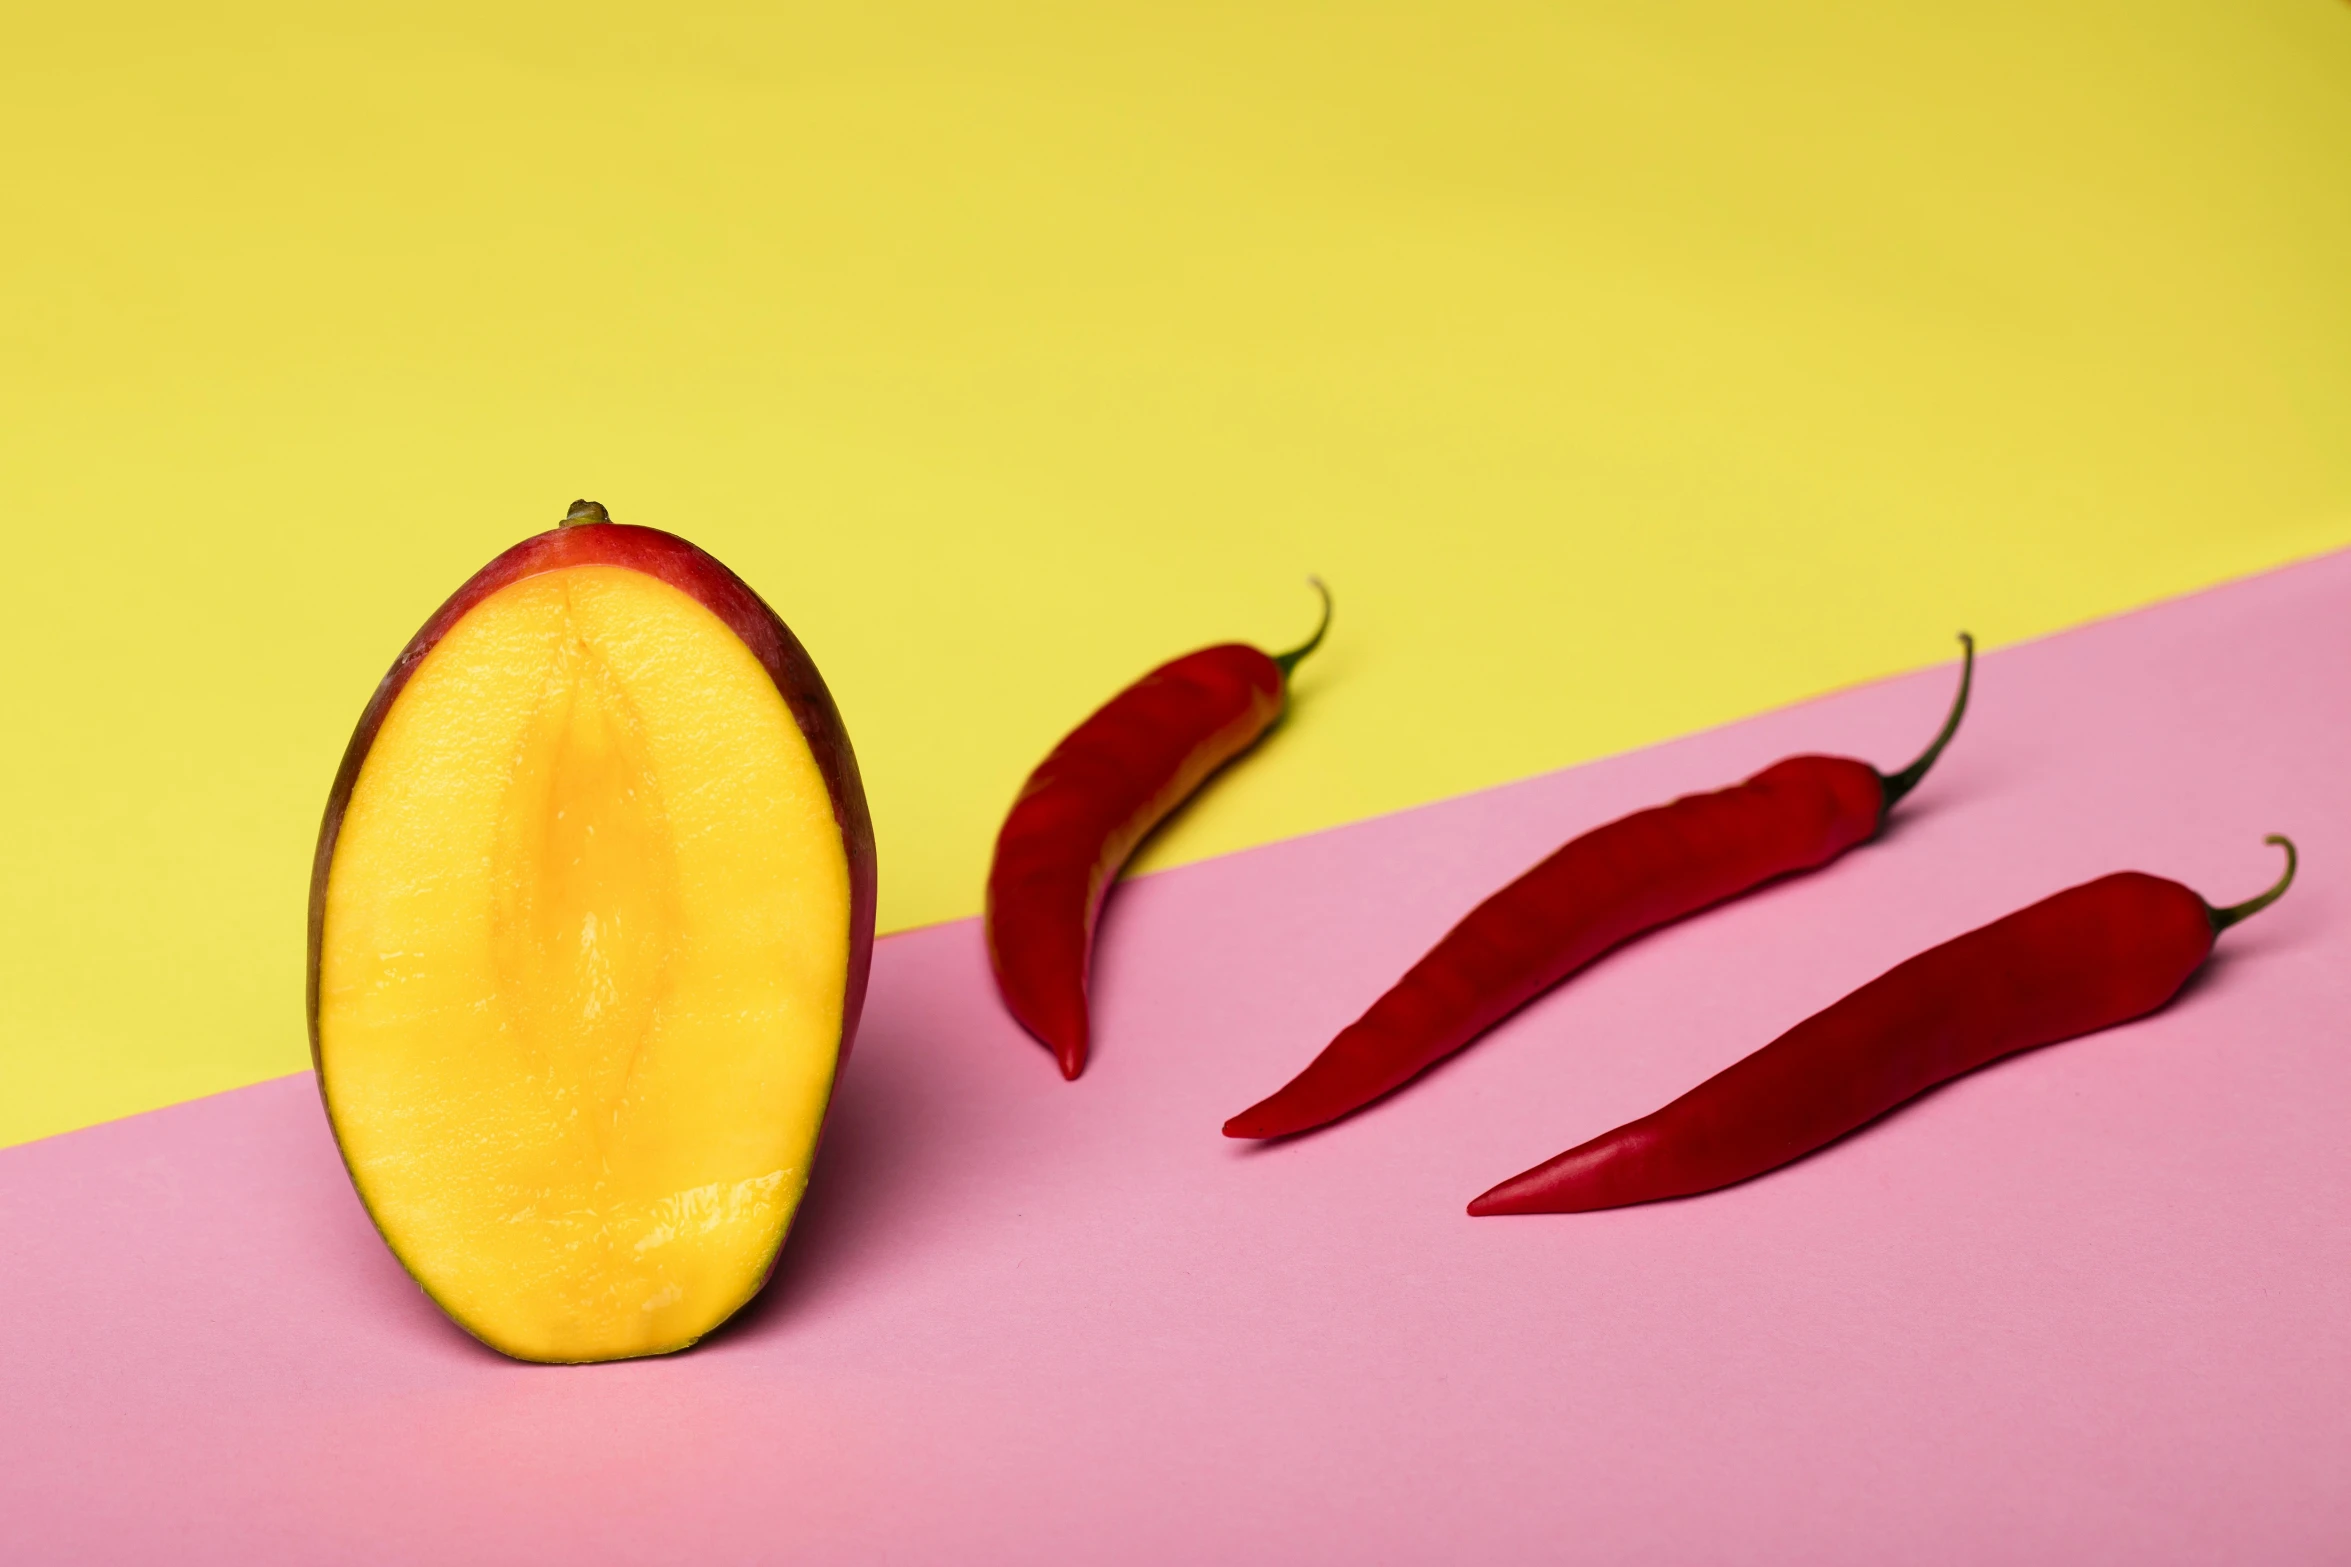 three chili peppers are sitting on a yellow and pink surface